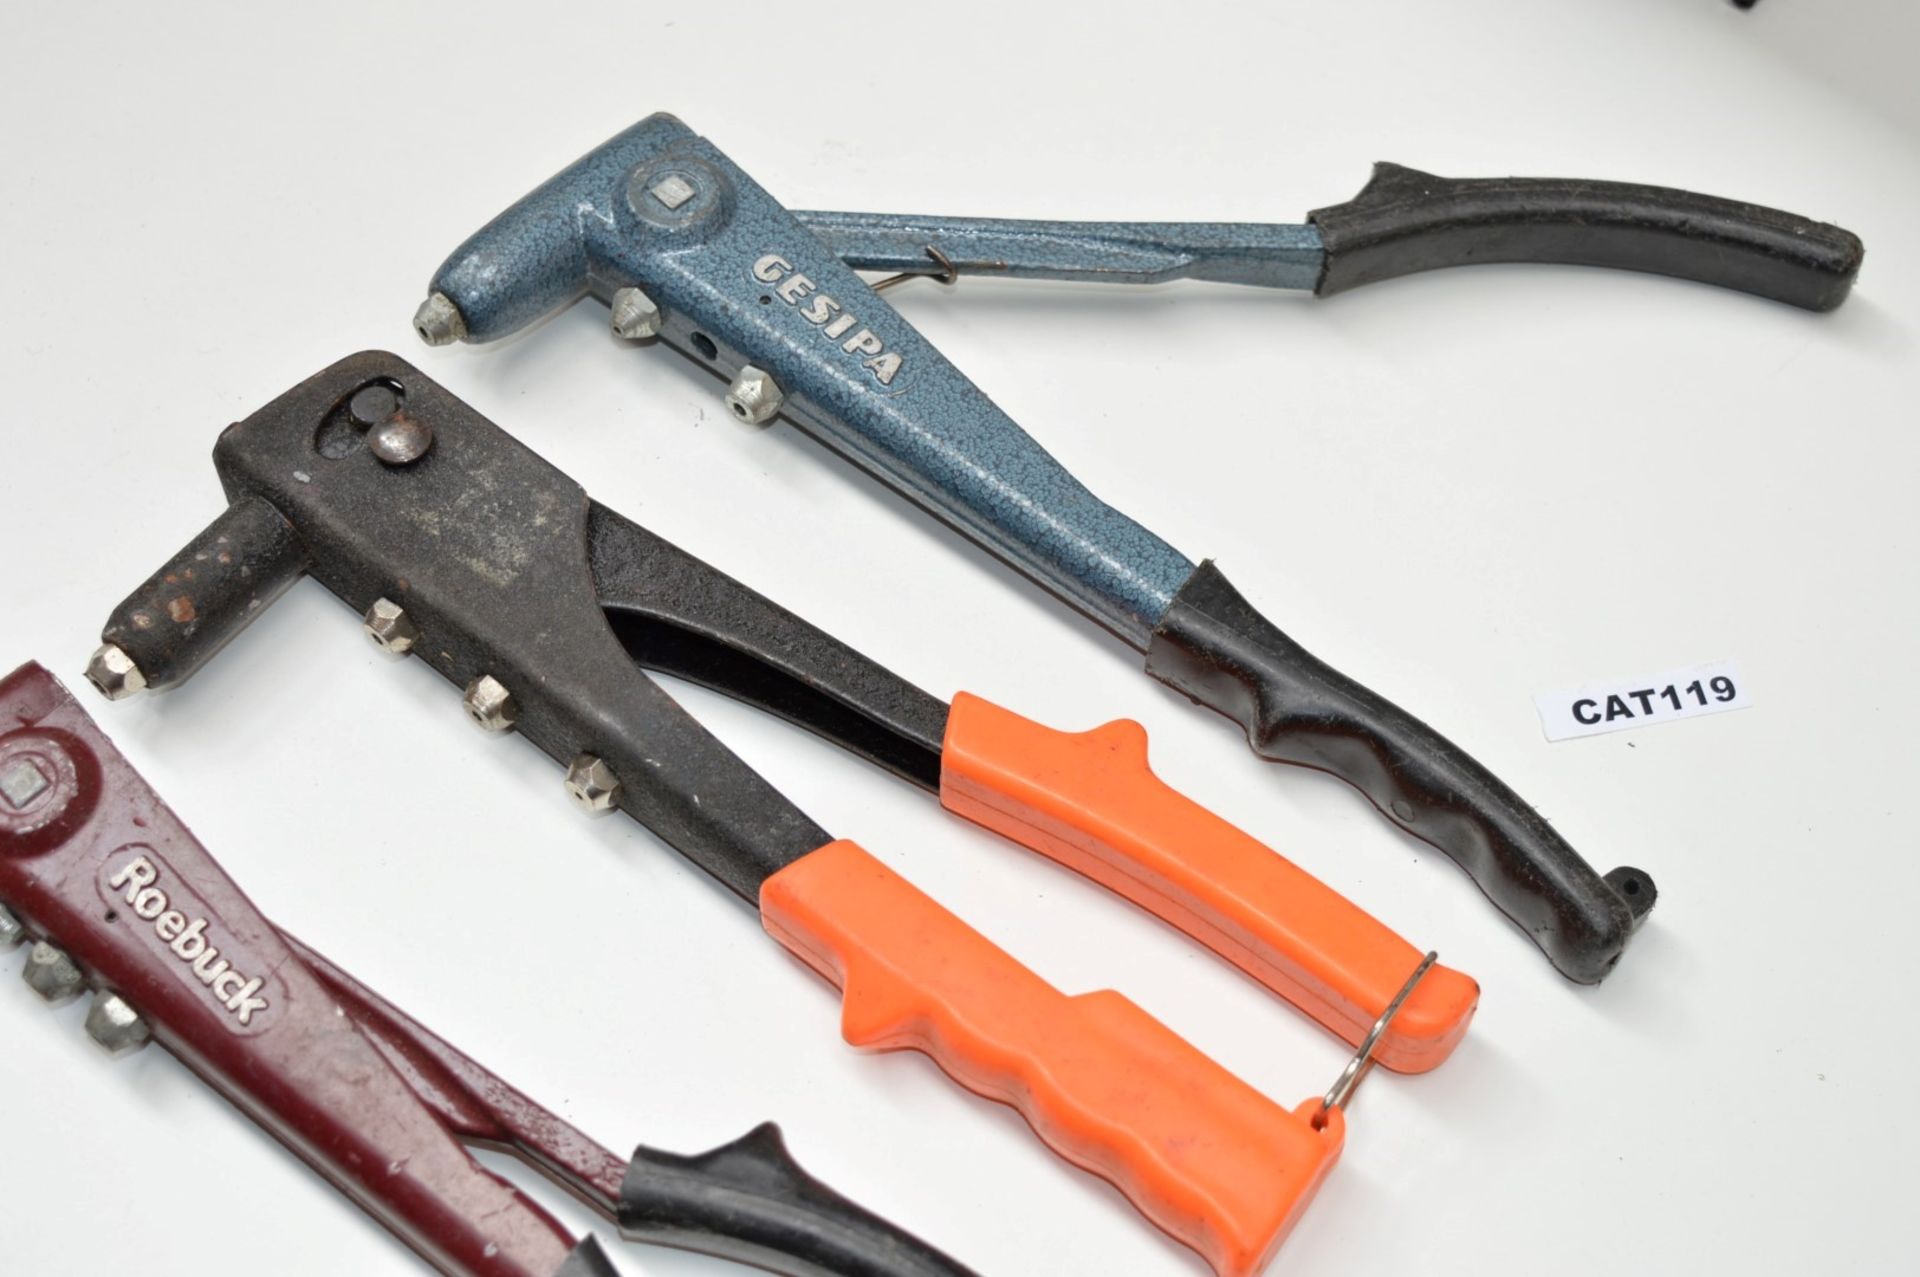 5 x  Various Hand Riveting Tools - Brands Include Roebuck and Gesipa - Ref CAT119 - CL300 - - Image 2 of 3